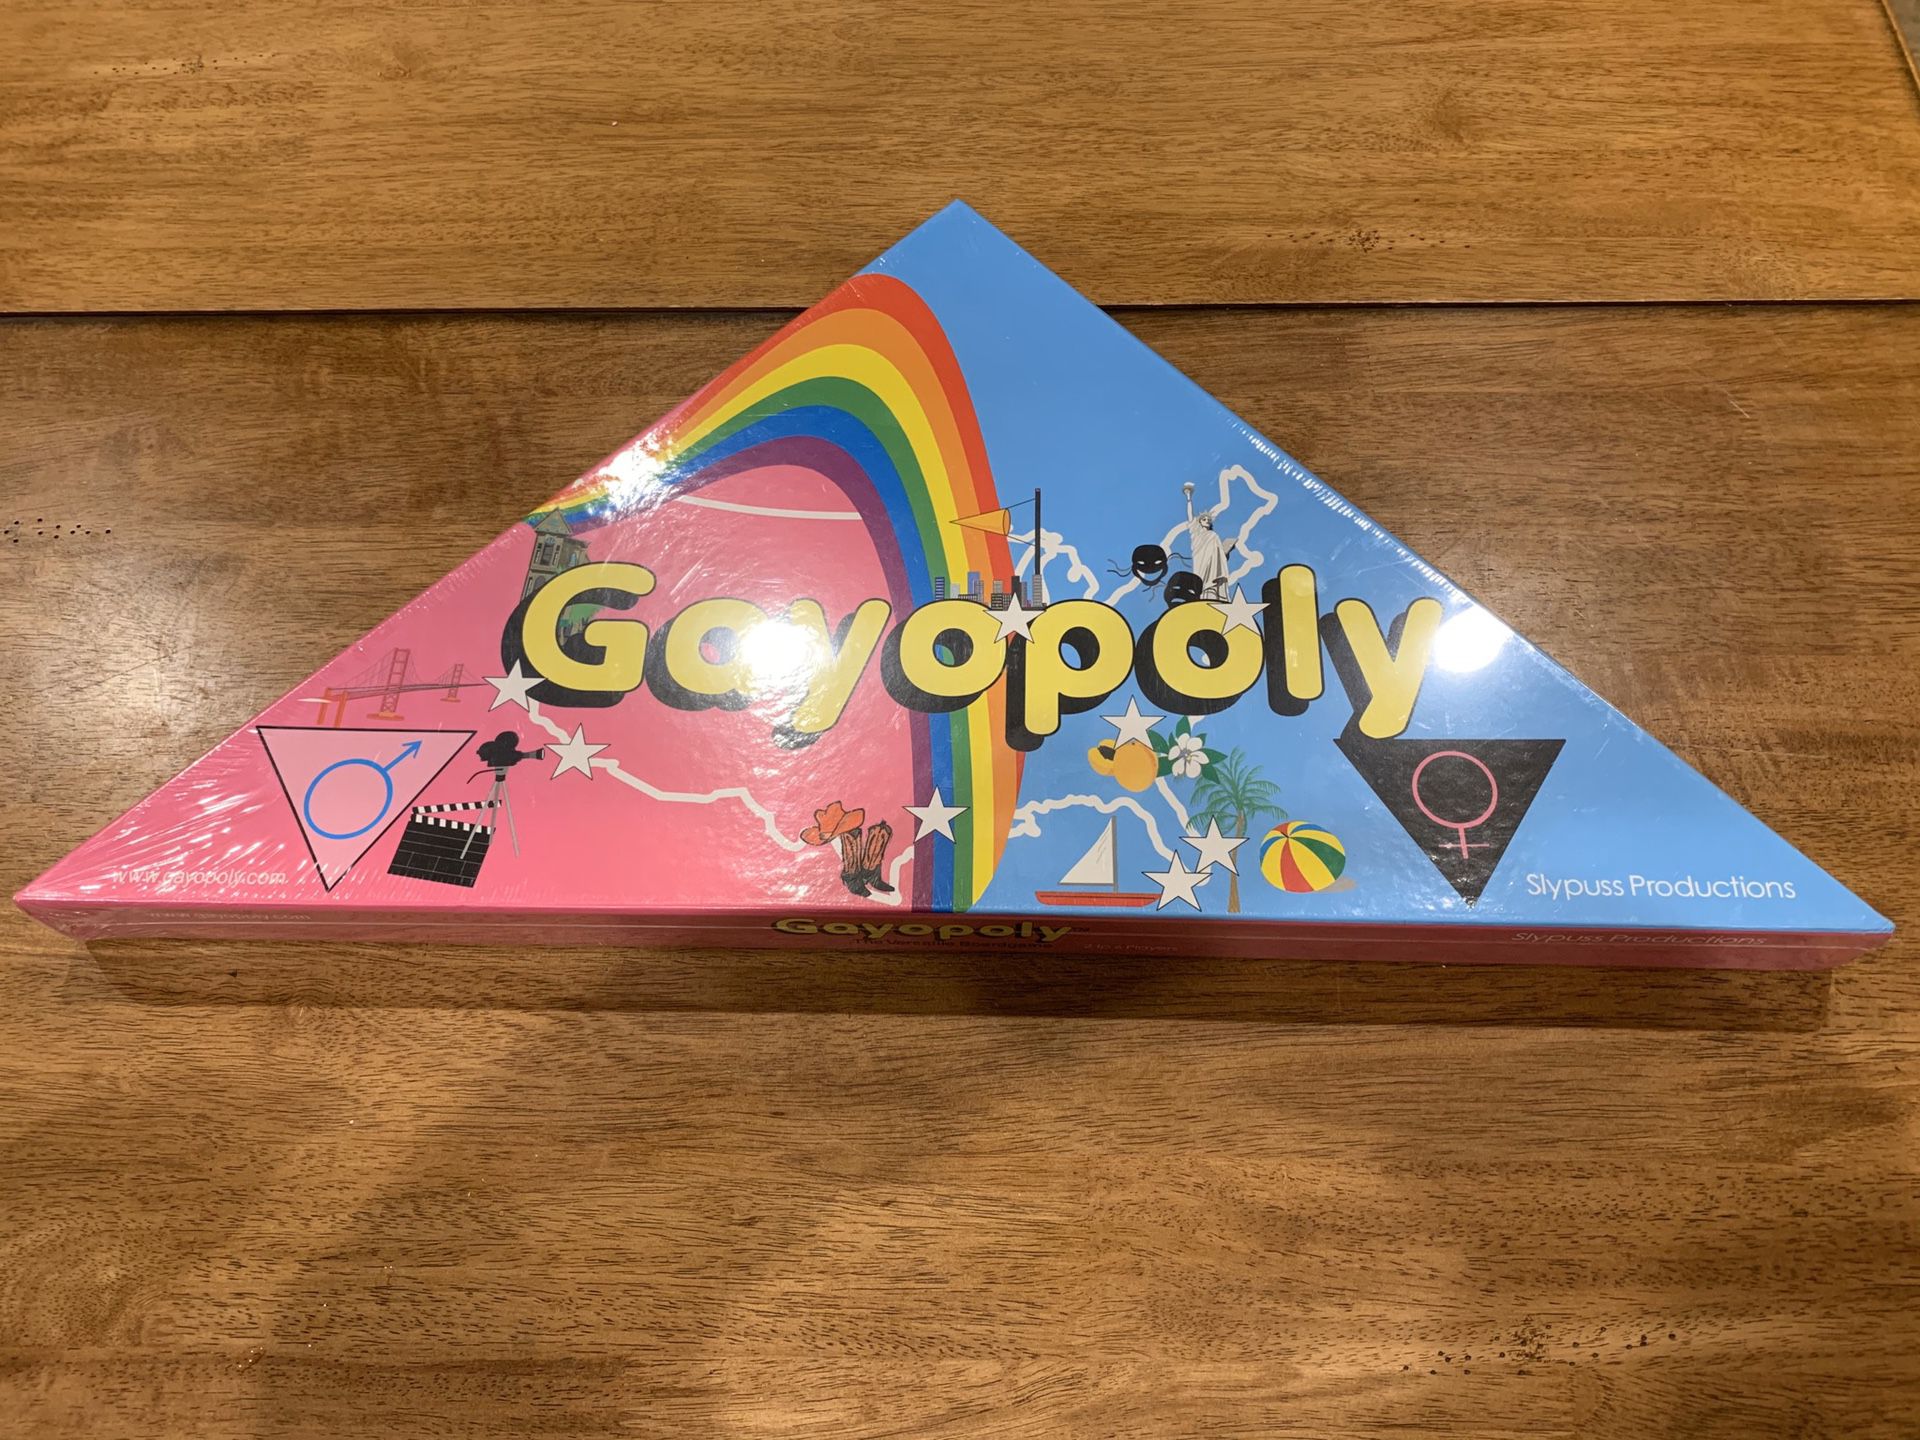 Rare Gayopoly Board Game LGBT Pride Slypuss Productions Brand New Sealed